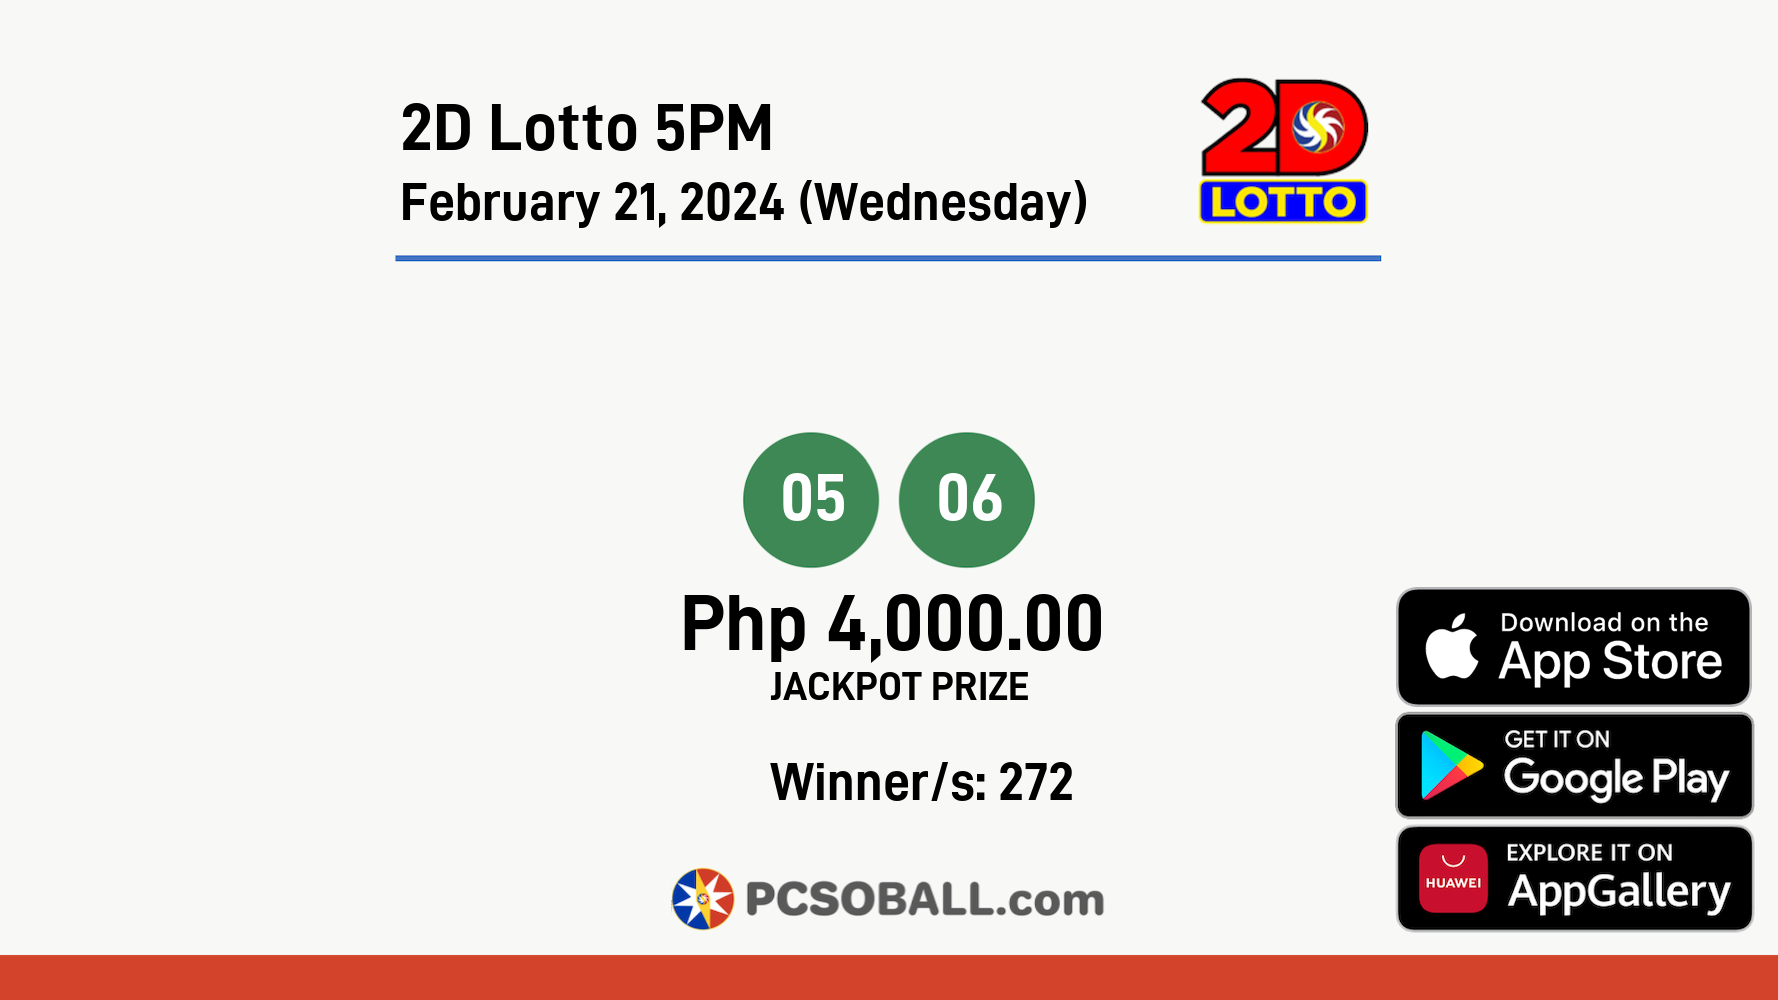 2D Lotto 5PM February 21, 2024 (Wednesday) Result